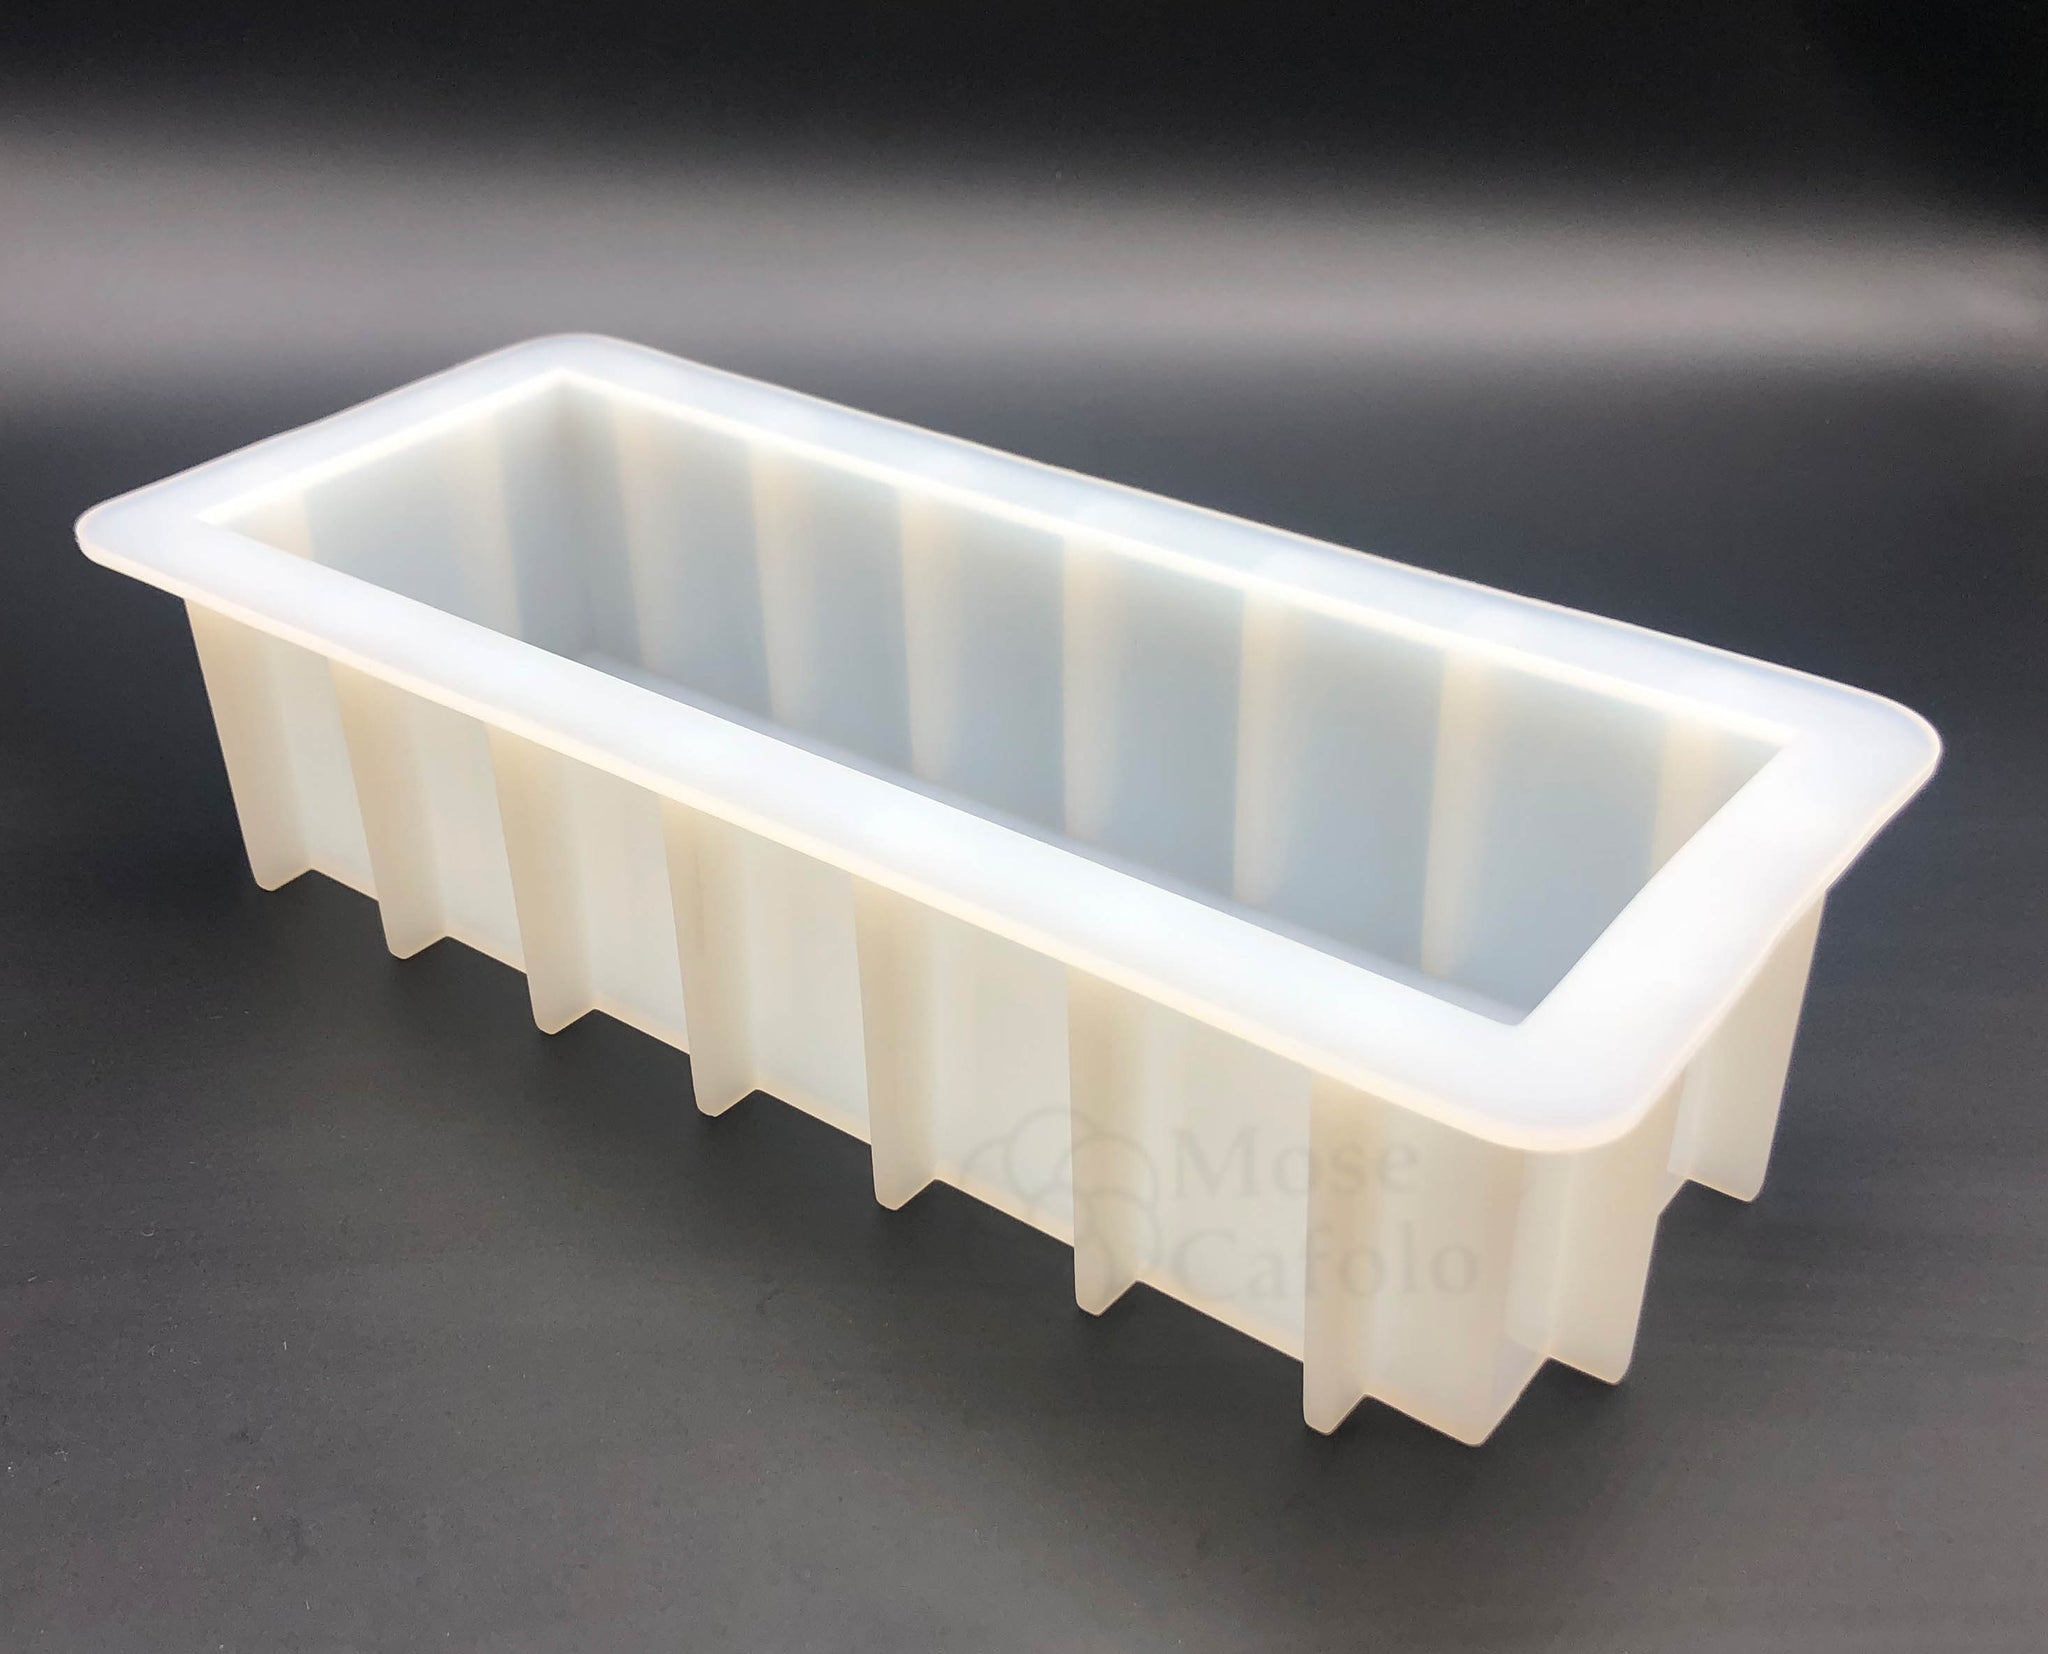 Flexible Square Silicone Soap Loaf Mold